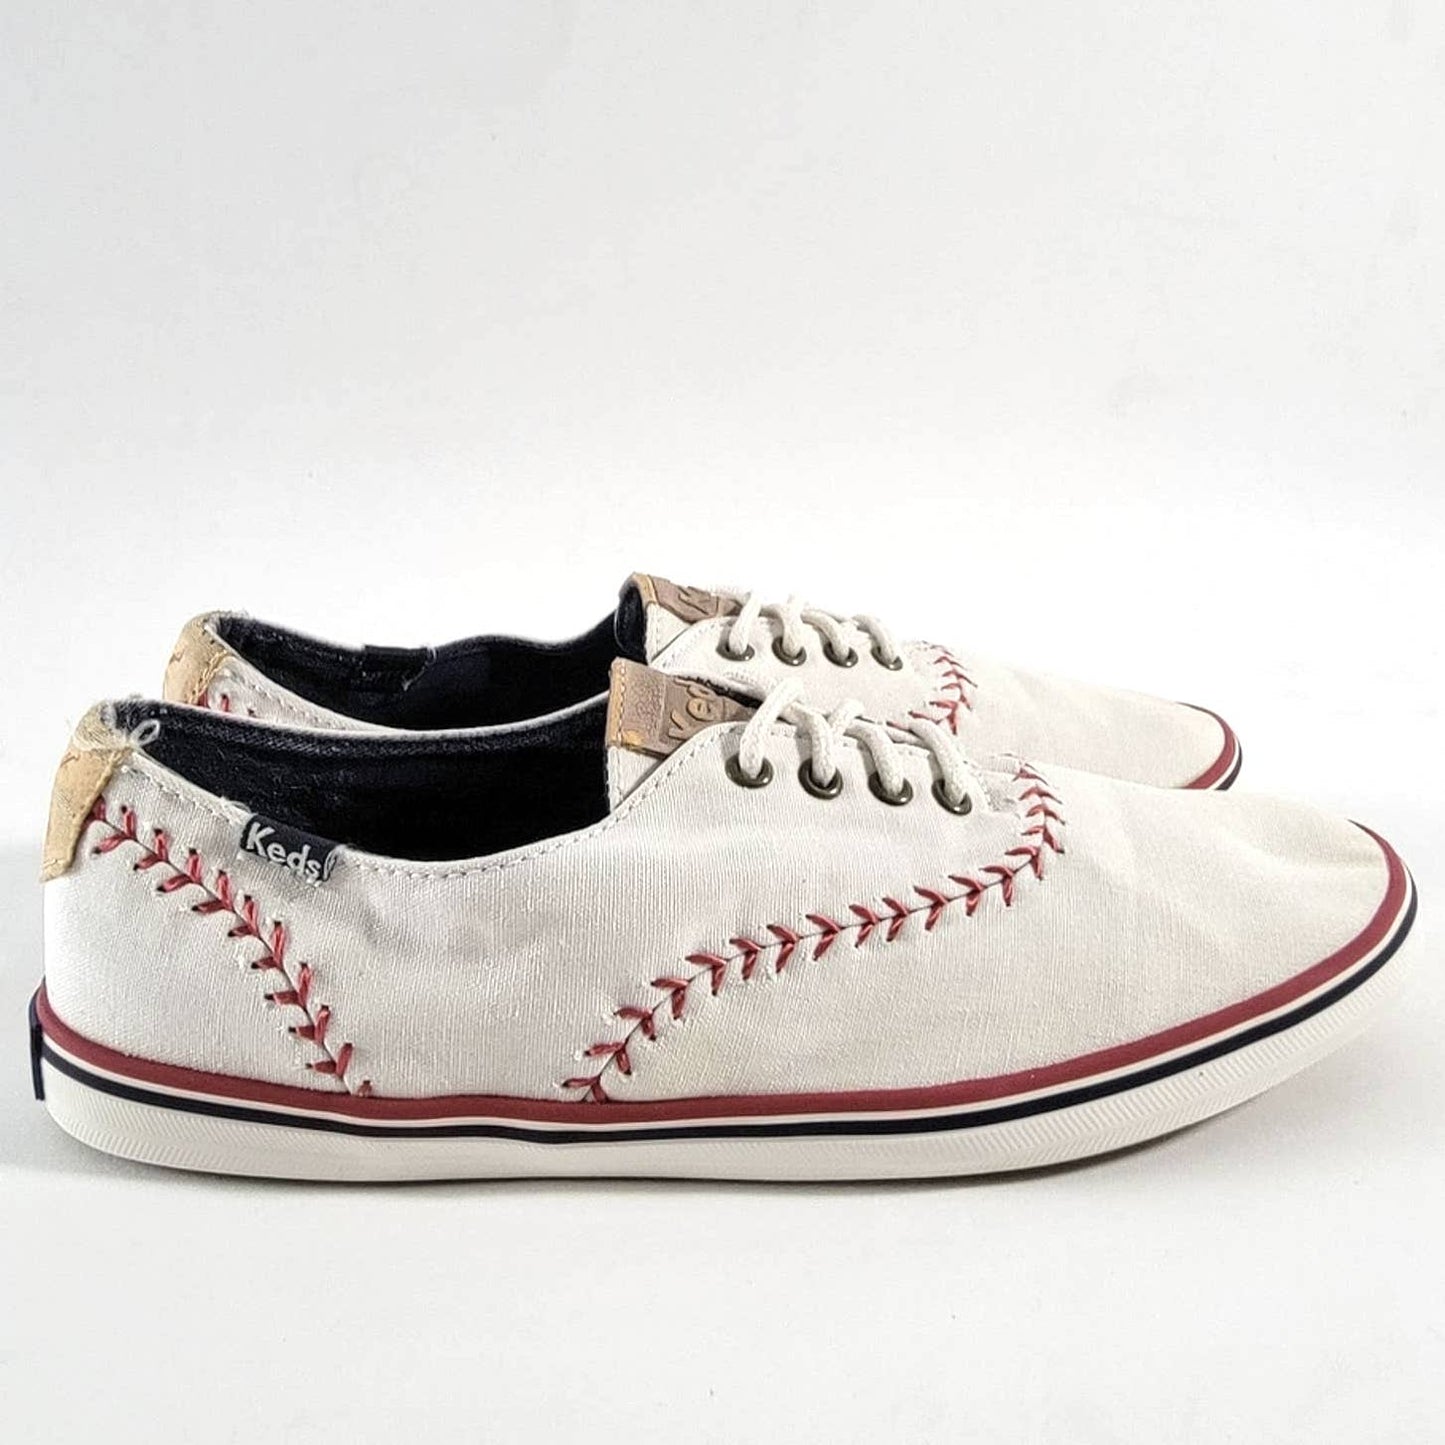 Keds Champion White Baseball Stitch Lace Up Low Top Sneakers - 6.5